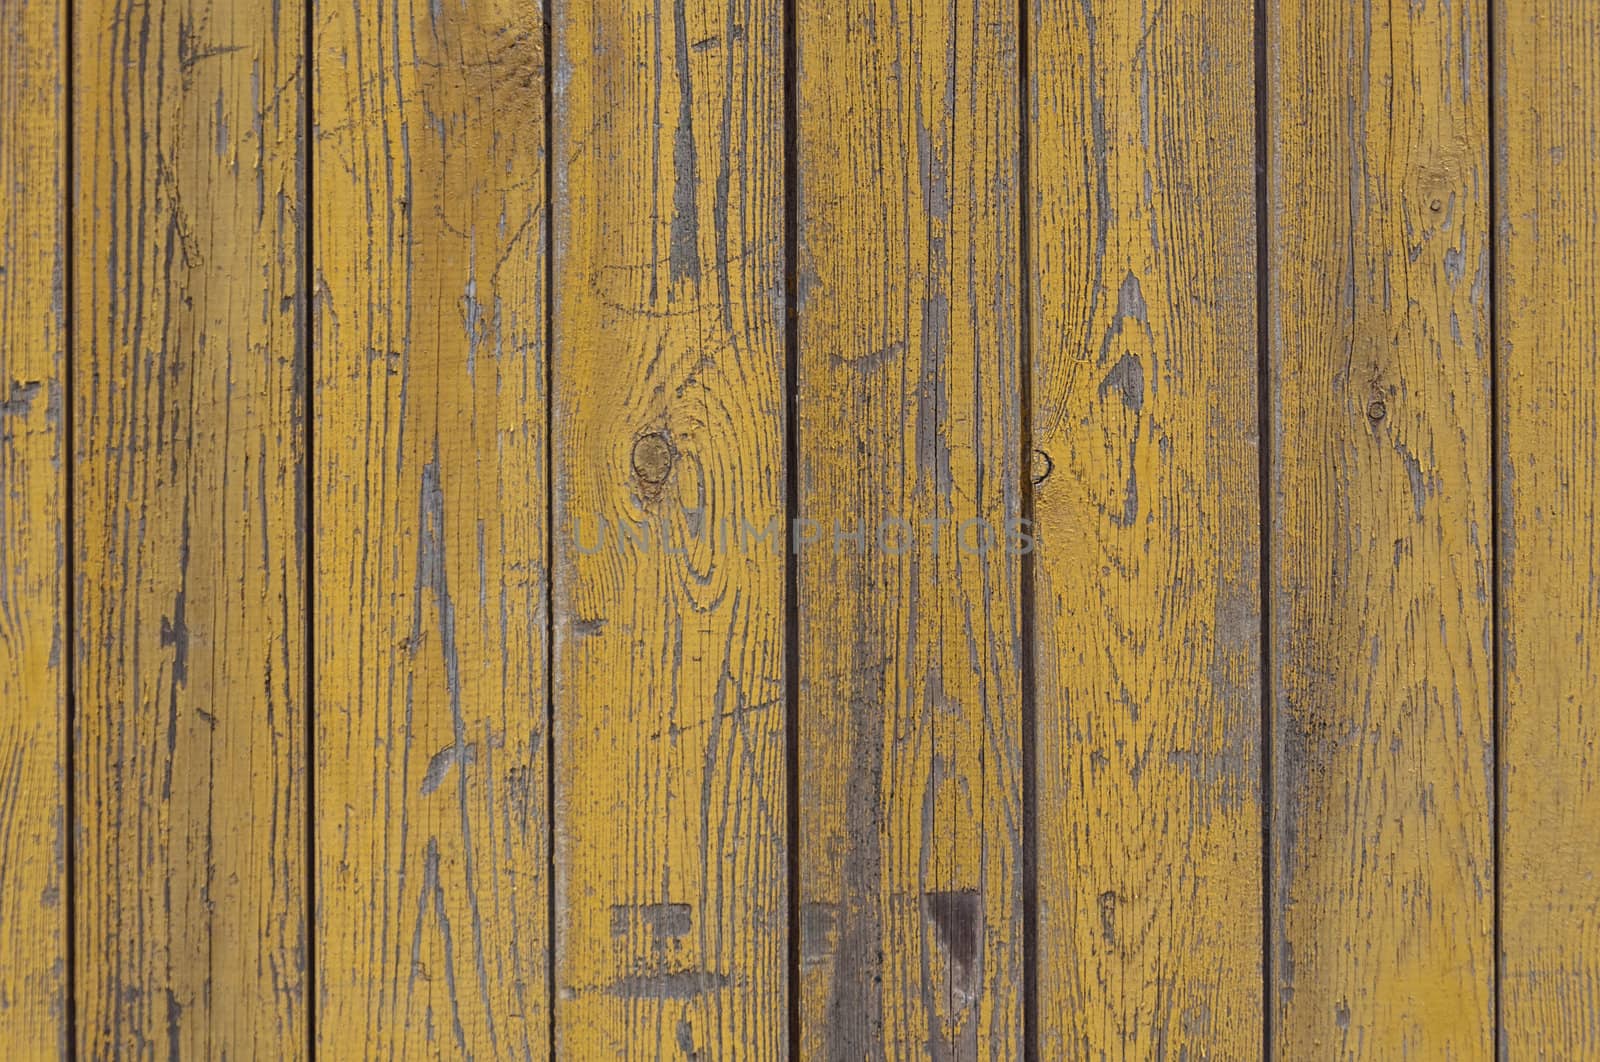 Old grunge shabby background with yellow boards.